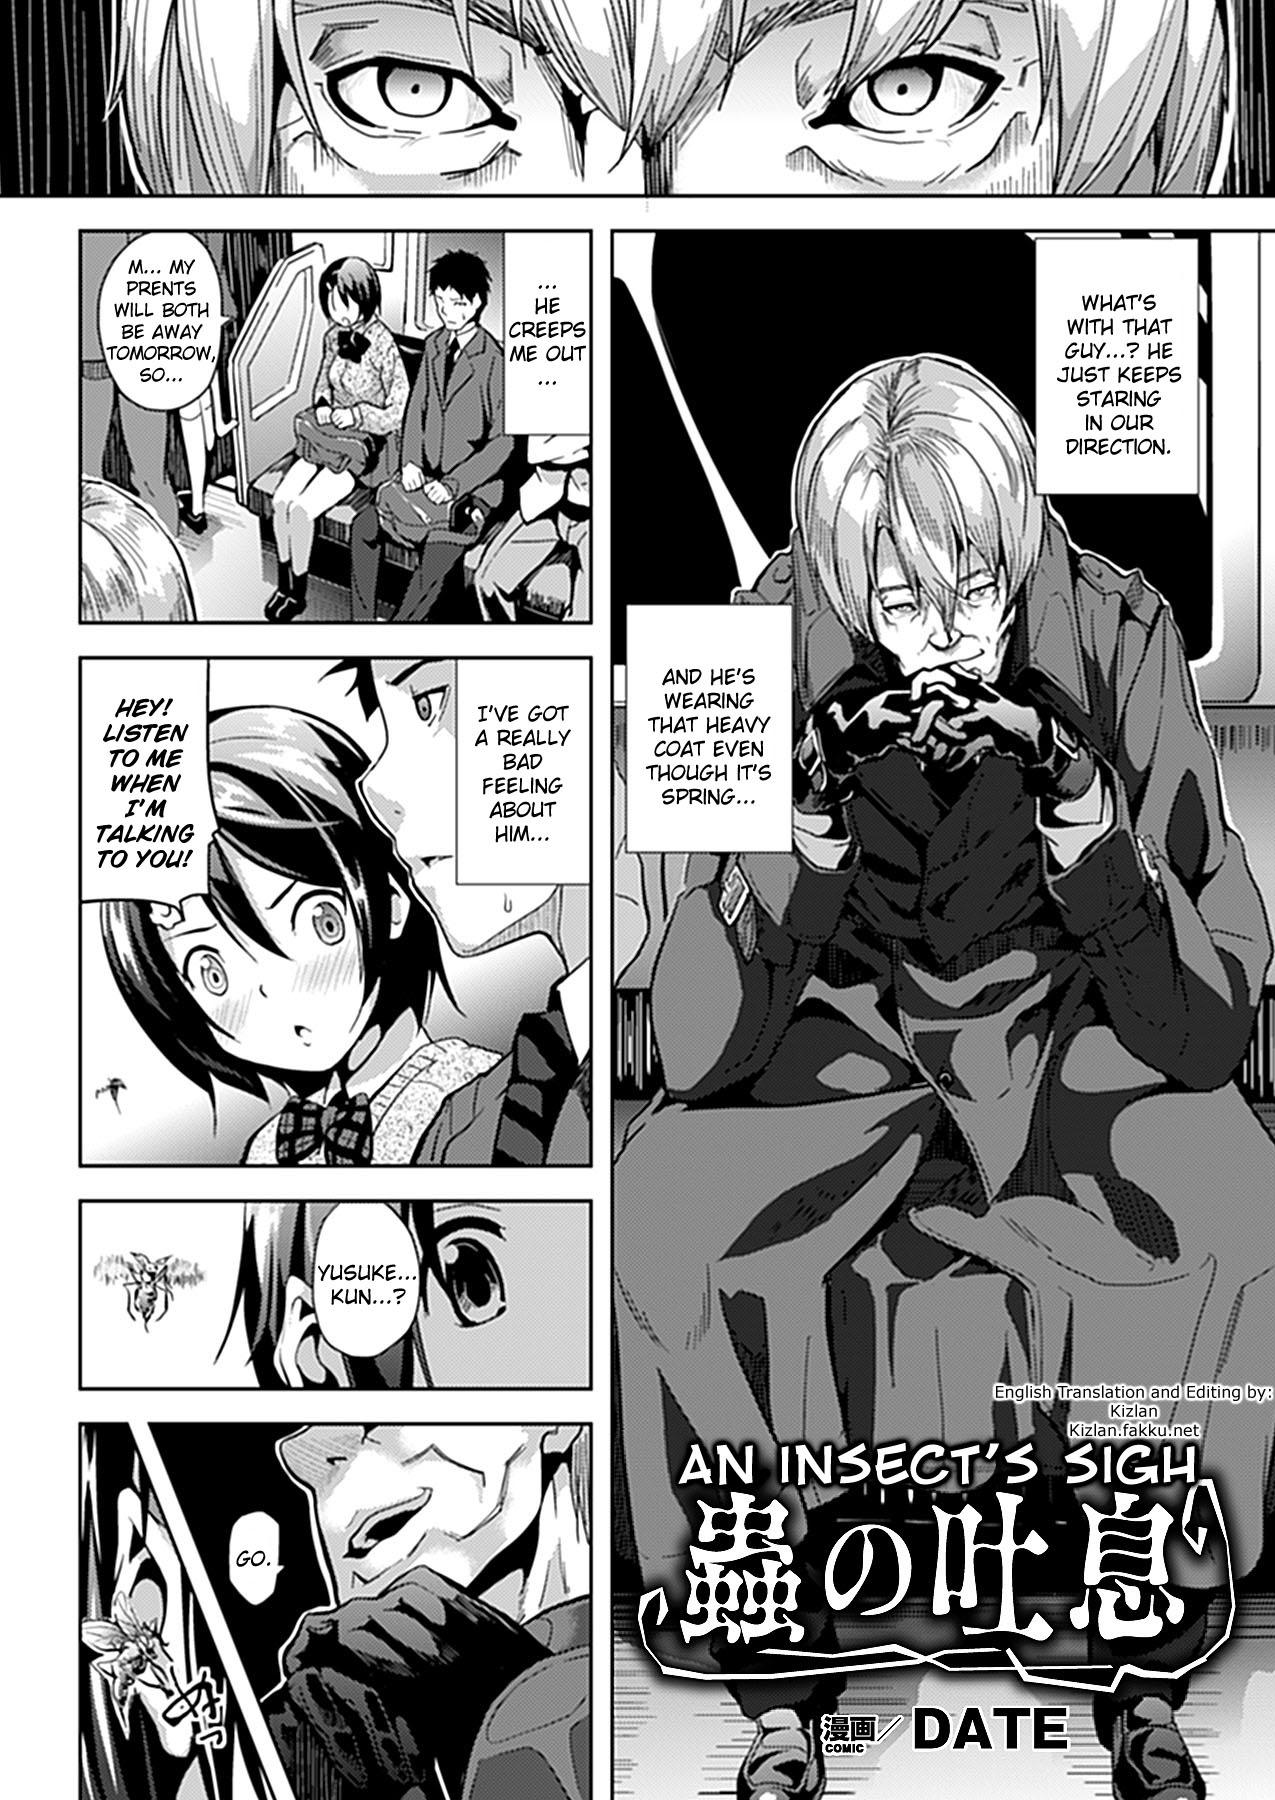 Boyfriend Mushi no Toiki | An Insect's Sigh Facefuck - Page 2